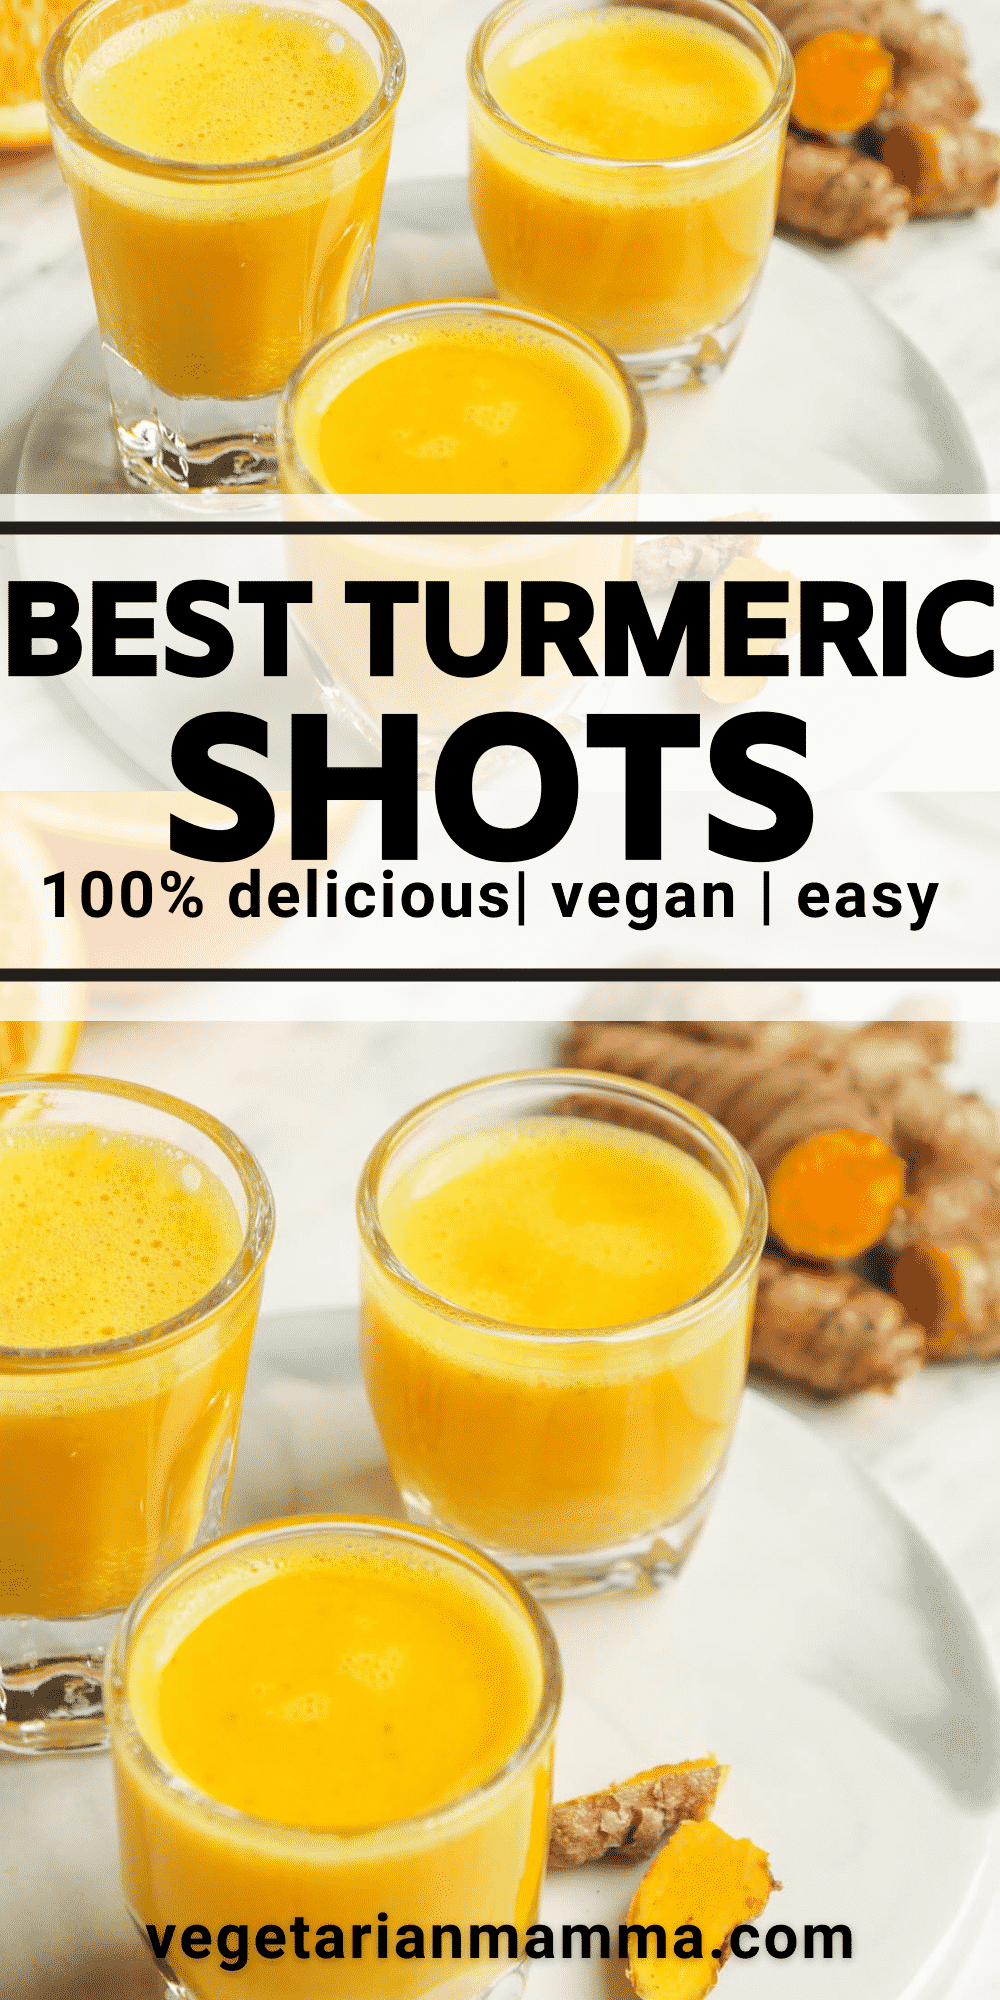 Turmeric shots are a delicious way to enjoy the powerful flavors of turmeric and also enjoy the benefits turmeric has to offer.